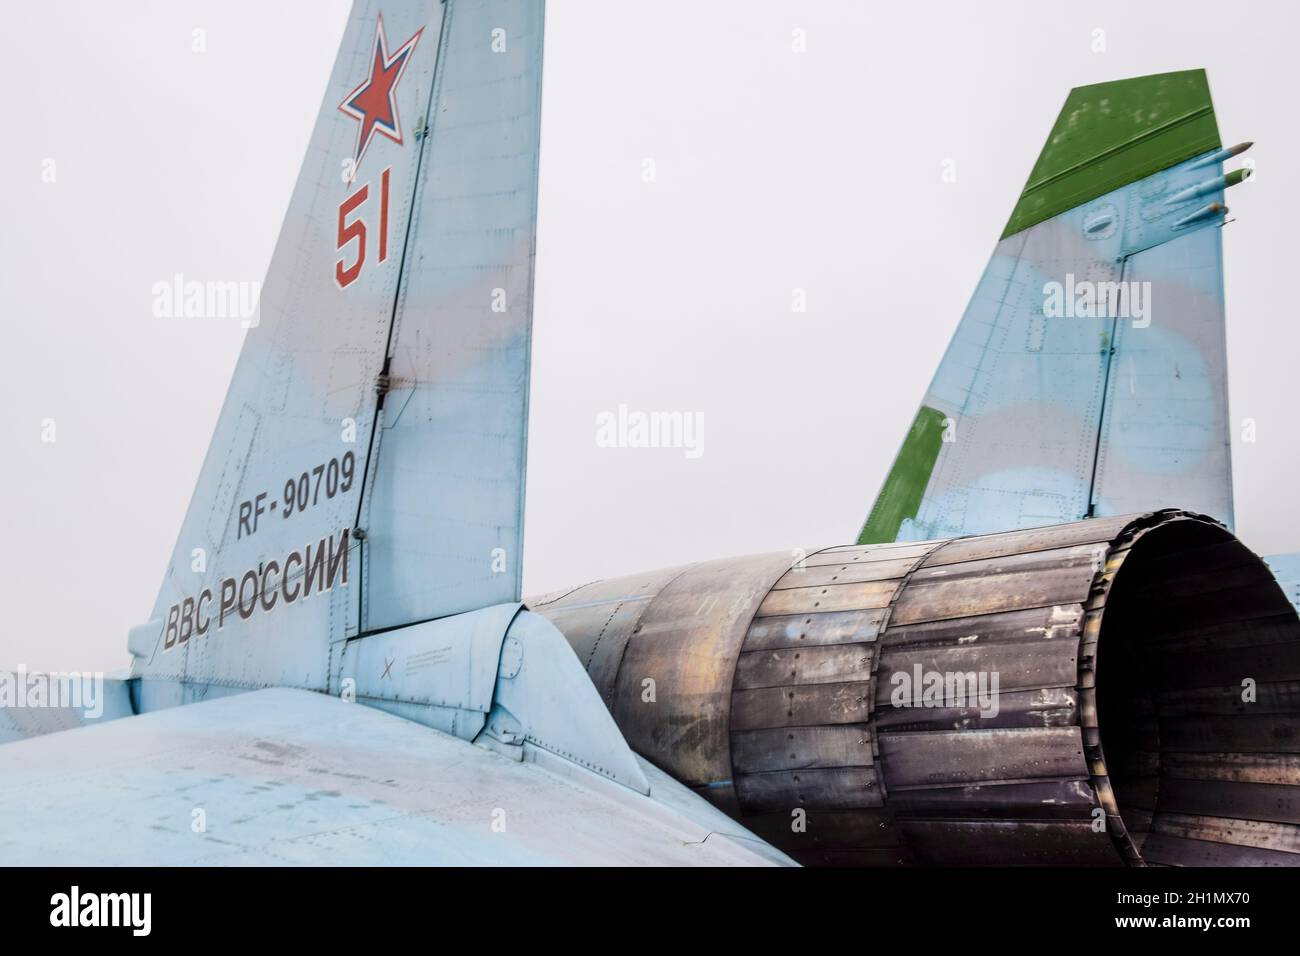 Krasnodar, Russia - February 23, 2017: The rear part of the Su-35 fighter. Steering flaps. A nozzle of a jet engine of an amber with a variable thrust Stock Photo